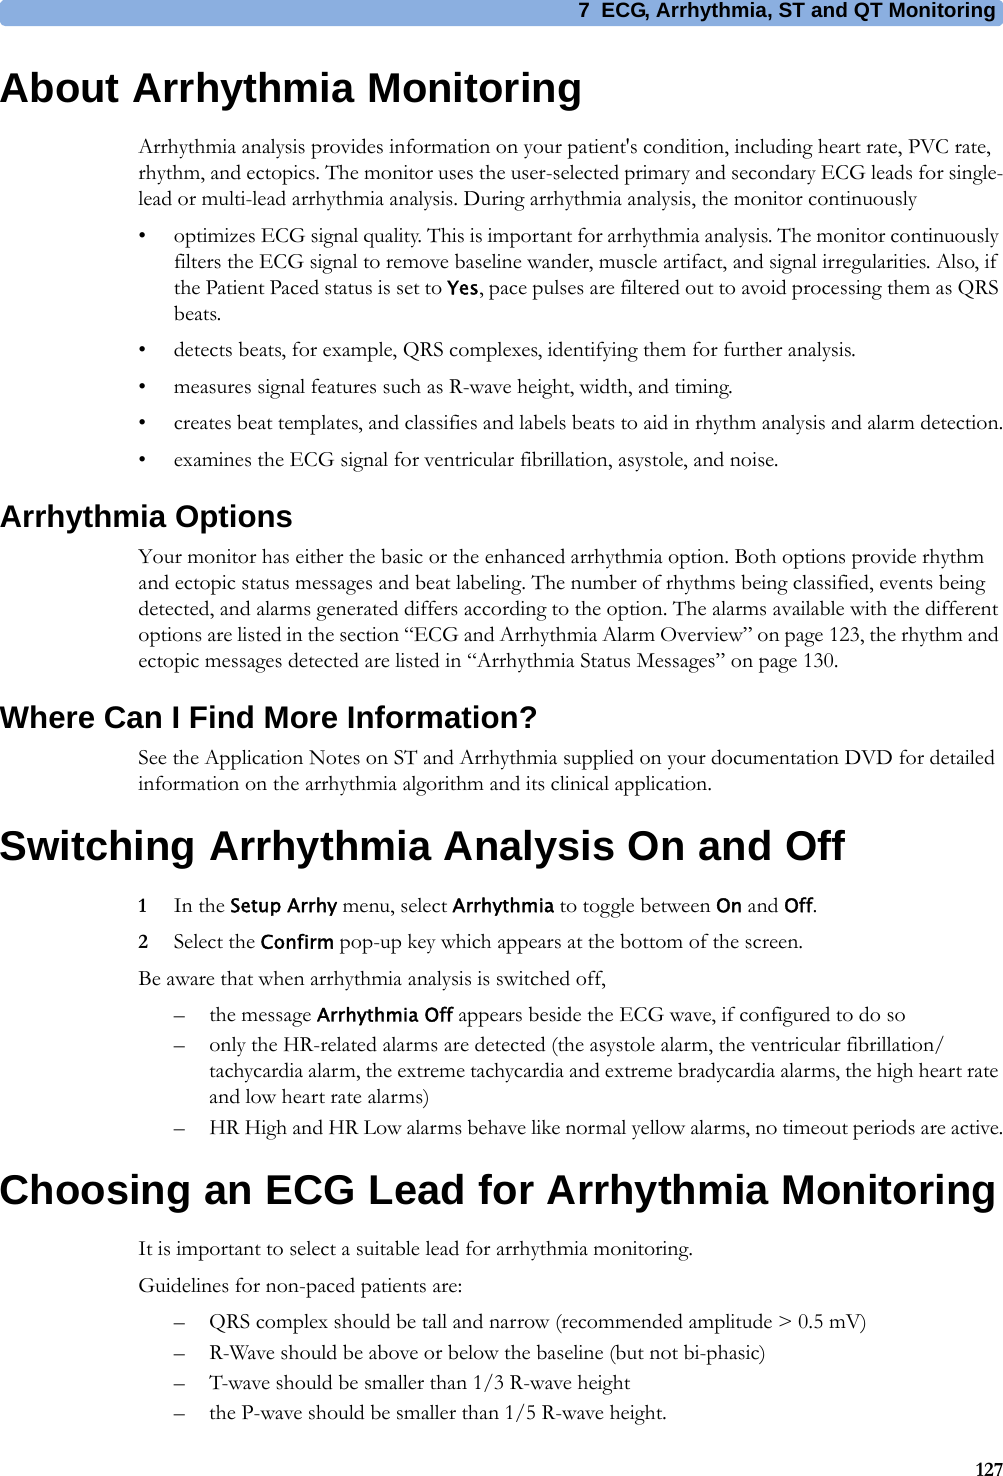 7 ECG, Arrhythmia, ST and QT Monitoring127About Arrhythmia MonitoringArrhythmia analysis provides information on your patient&apos;s condition, including heart rate, PVC rate, rhythm, and ectopics. The monitor uses the user-selected primary and secondary ECG leads for single-lead or multi-lead arrhythmia analysis. During arrhythmia analysis, the monitor continuously• optimizes ECG signal quality. This is important for arrhythmia analysis. The monitor continuously filters the ECG signal to remove baseline wander, muscle artifact, and signal irregularities. Also, if the Patient Paced status is set to Yes, pace pulses are filtered out to avoid processing them as QRS beats.• detects beats, for example, QRS complexes, identifying them for further analysis.• measures signal features such as R-wave height, width, and timing.• creates beat templates, and classifies and labels beats to aid in rhythm analysis and alarm detection.• examines the ECG signal for ventricular fibrillation, asystole, and noise.Arrhythmia OptionsYour monitor has either the basic or the enhanced arrhythmia option. Both options provide rhythm and ectopic status messages and beat labeling. The number of rhythms being classified, events being detected, and alarms generated differs according to the option. The alarms available with the different options are listed in the section “ECG and Arrhythmia Alarm Overview” on page 123, the rhythm and ectopic messages detected are listed in “Arrhythmia Status Messages” on page 130.Where Can I Find More Information?See the Application Notes on ST and Arrhythmia supplied on your documentation DVD for detailed information on the arrhythmia algorithm and its clinical application.Switching Arrhythmia Analysis On and Off1In the Setup Arrhy menu, select Arrhythmia to toggle between On and Off.2Select the Confirm pop-up key which appears at the bottom of the screen.Be aware that when arrhythmia analysis is switched off,– the message Arrhythmia Off appears beside the ECG wave, if configured to do so– only the HR-related alarms are detected (the asystole alarm, the ventricular fibrillation/tachycardia alarm, the extreme tachycardia and extreme bradycardia alarms, the high heart rate and low heart rate alarms)– HR High and HR Low alarms behave like normal yellow alarms, no timeout periods are active.Choosing an ECG Lead for Arrhythmia MonitoringIt is important to select a suitable lead for arrhythmia monitoring.Guidelines for non-paced patients are:– QRS complex should be tall and narrow (recommended amplitude &gt; 0.5 mV)– R-Wave should be above or below the baseline (but not bi-phasic)– T-wave should be smaller than 1/3 R-wave height– the P-wave should be smaller than 1/5 R-wave height.